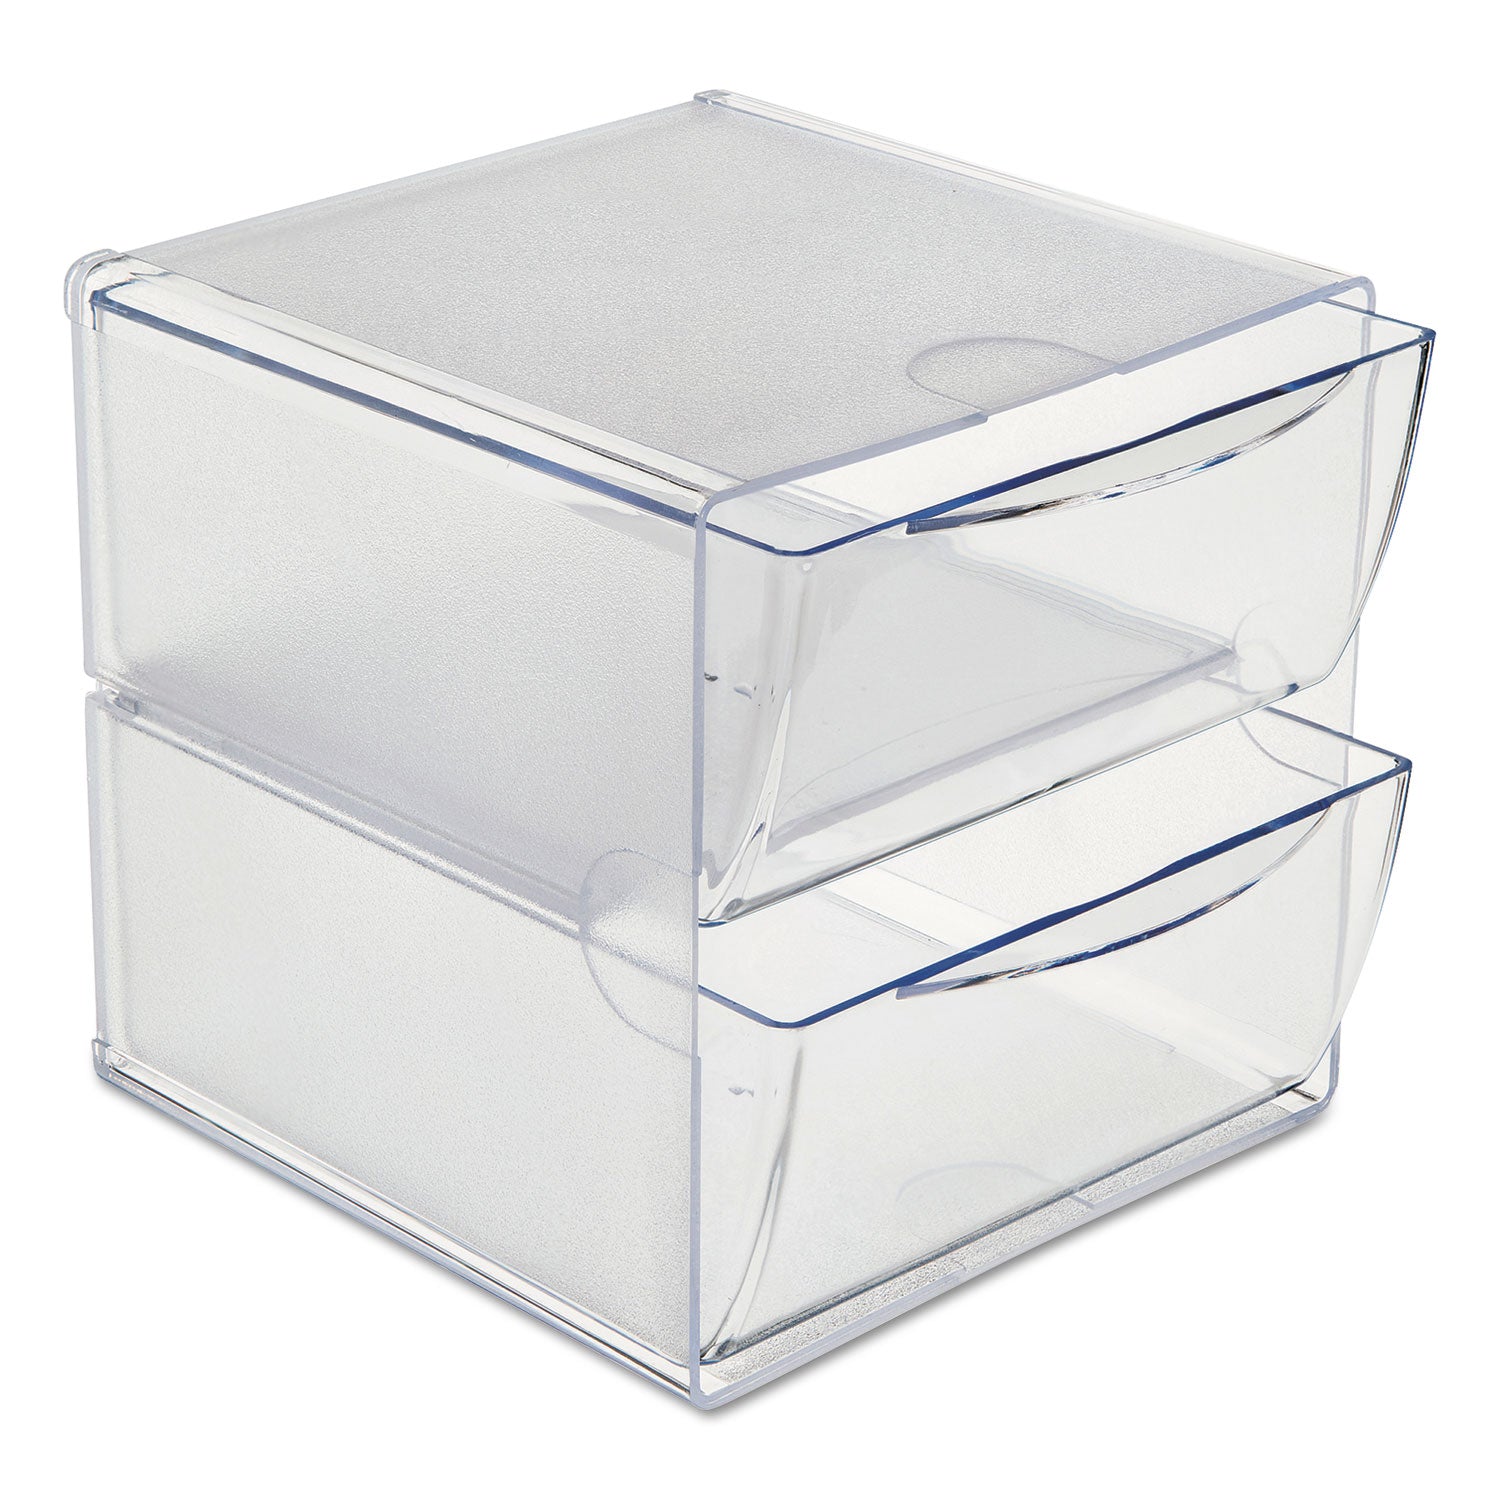 Stackable Cube Organizer, 2 Compartments, 2 Drawers, Plastic, 6 x 7.2 x 6, Clear - 